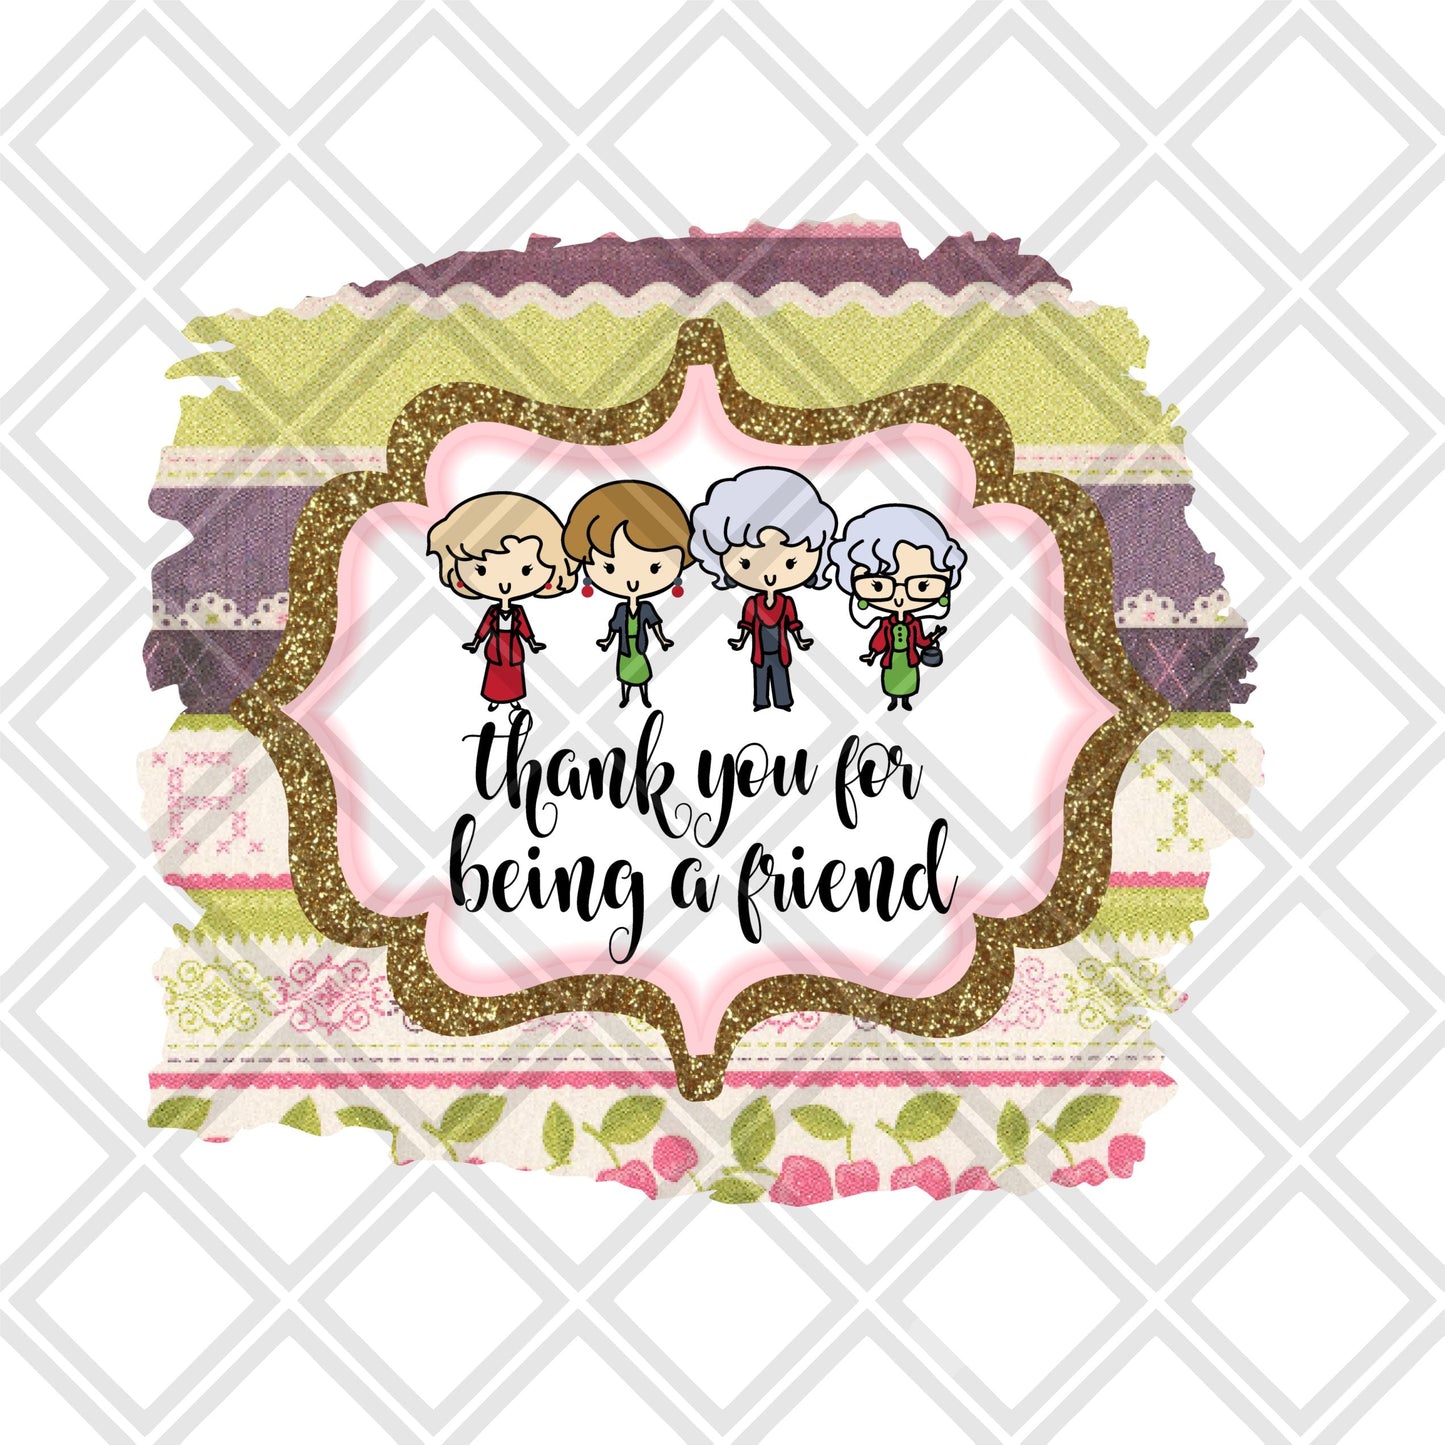 Thank you for being a friend golden girls DTF TRANSFERPRINT TO ORDER